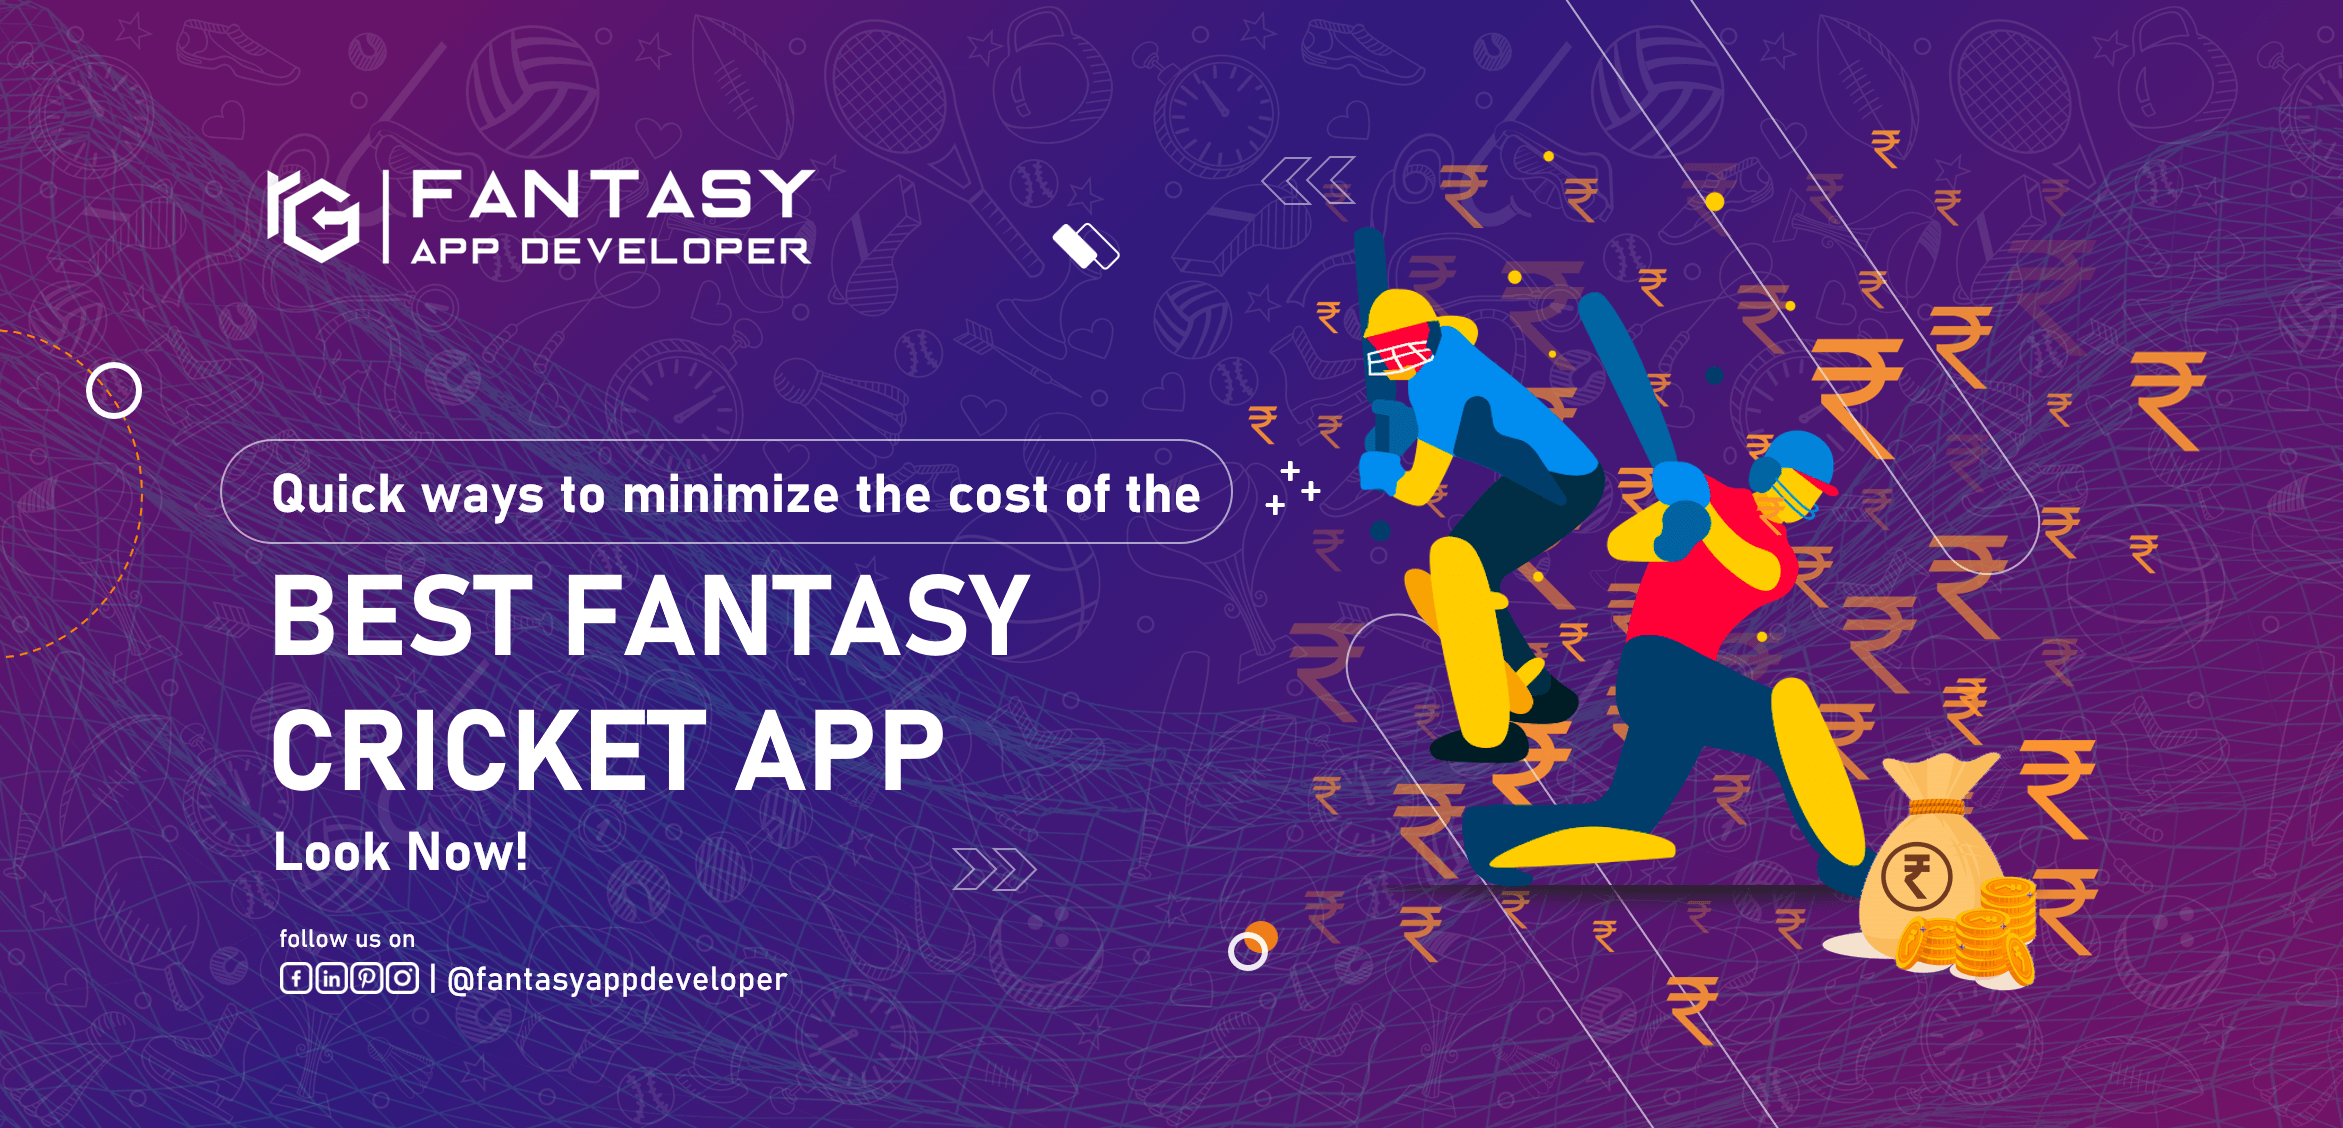 Quick ways to minimize the cost of the best Fantasy Cricket App